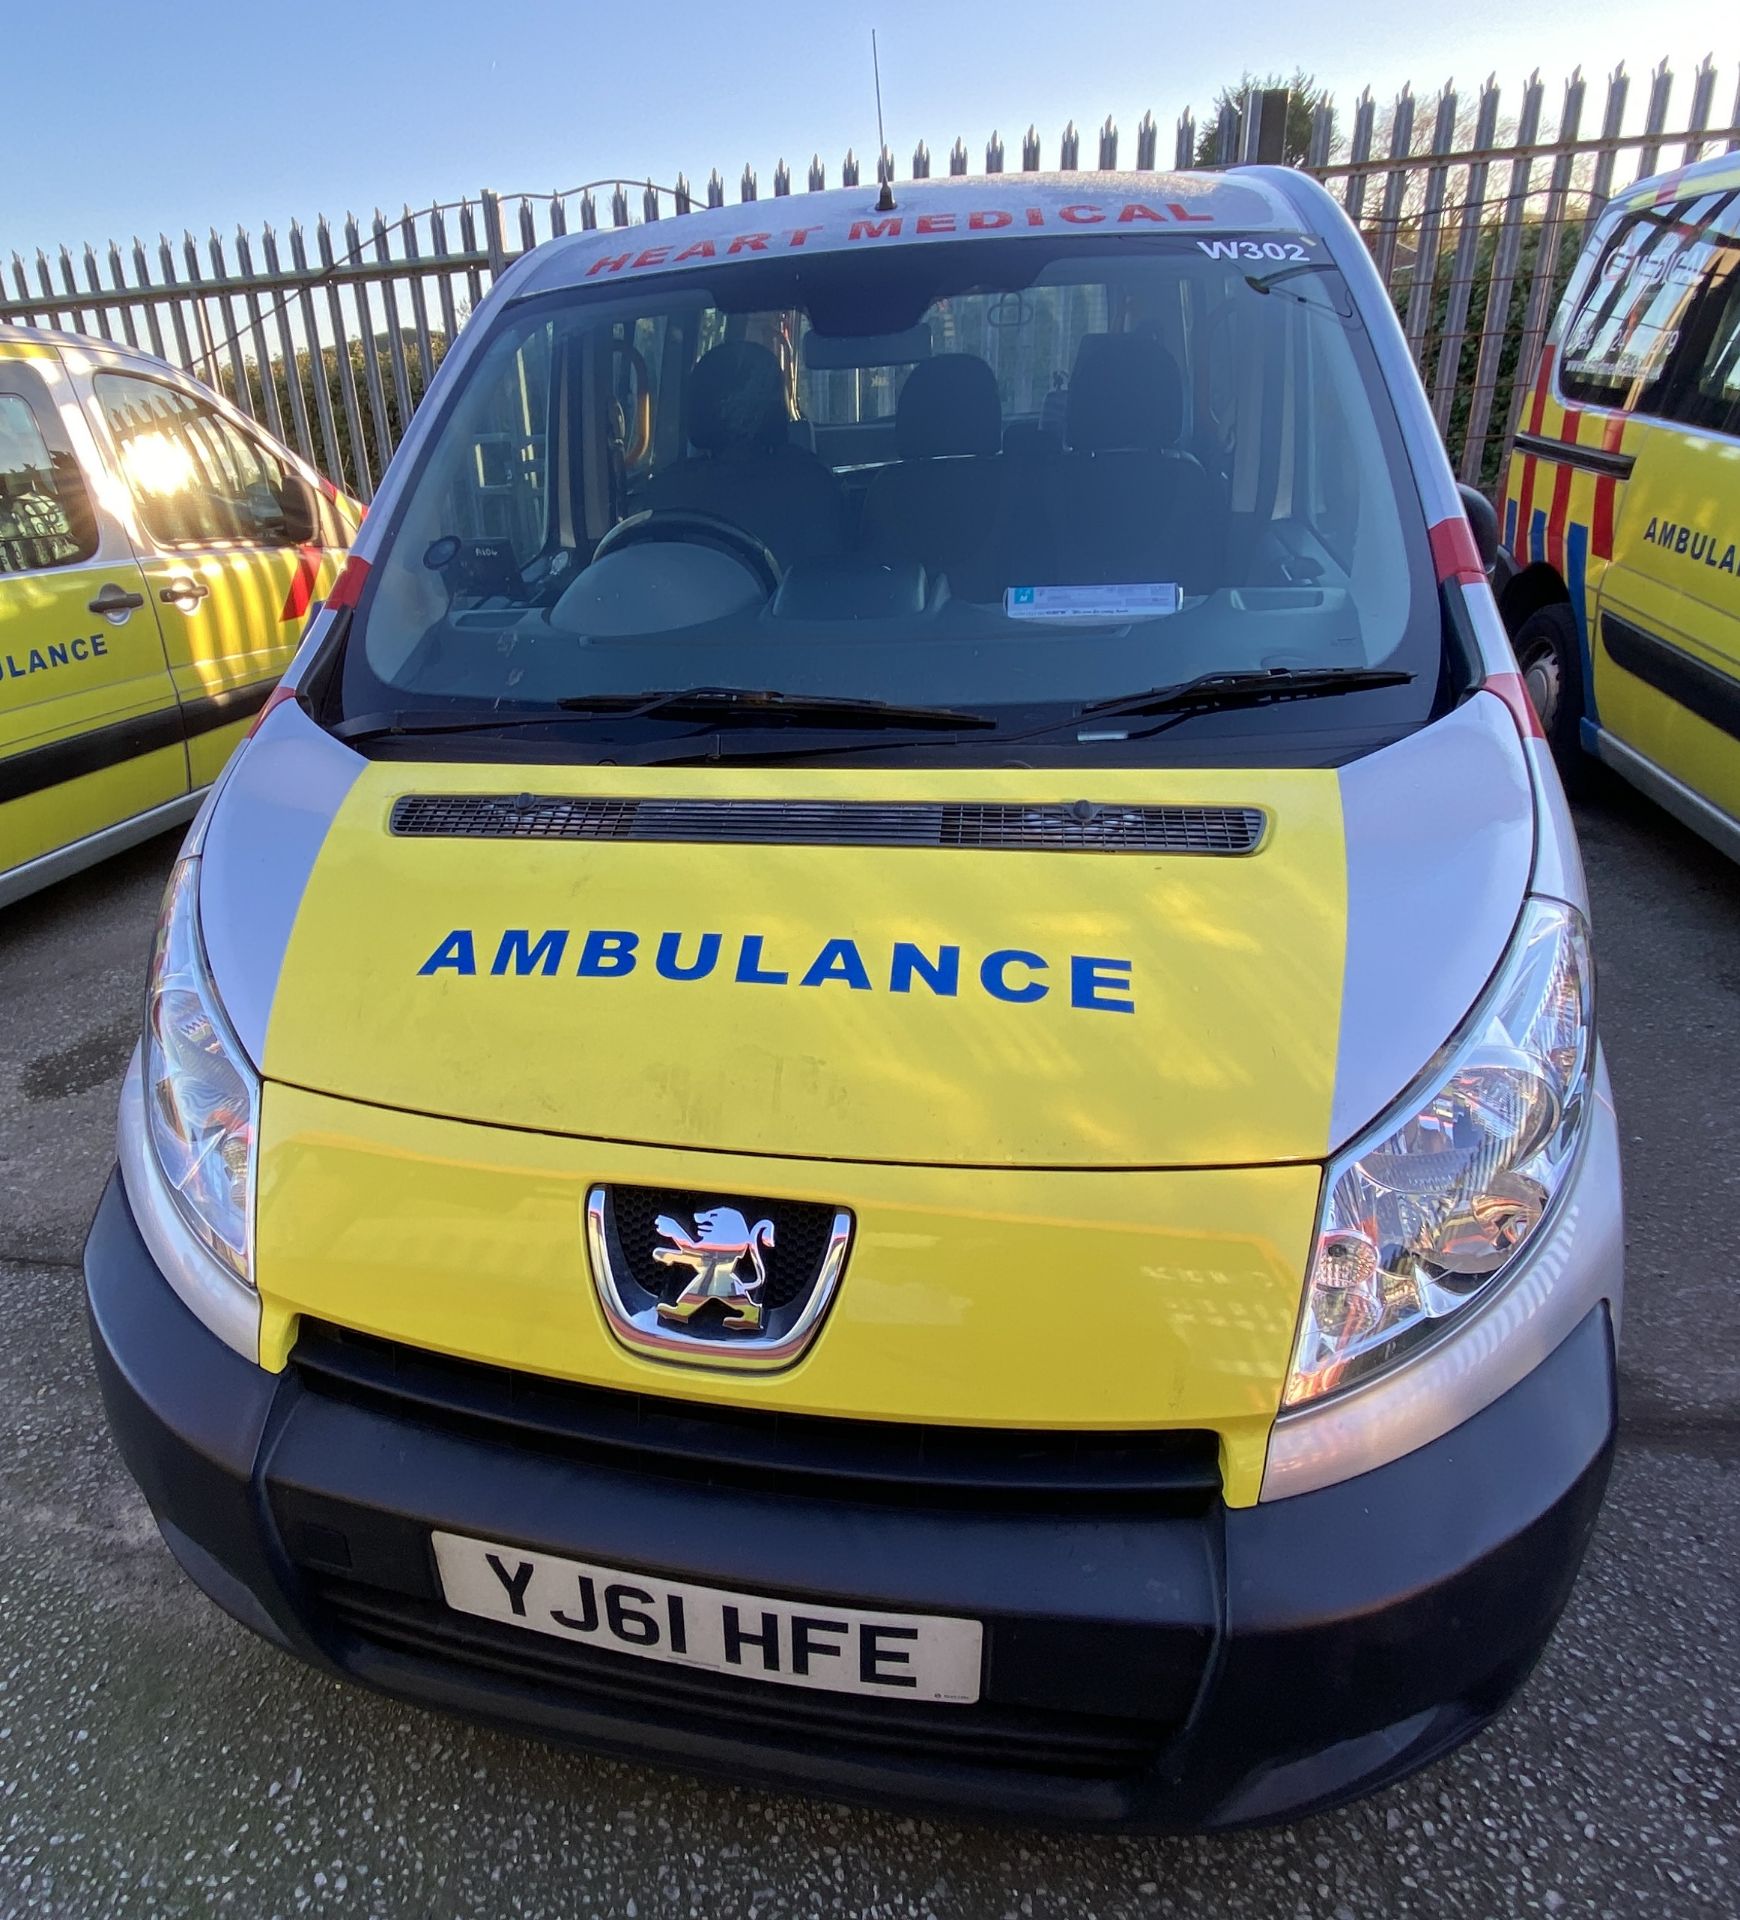 PEUGEOT EXPERT TEPEE COMFORT HDI VAN LIVERIED UP AS AN AMBULANCE - Diesel - Silver. - Image 3 of 16